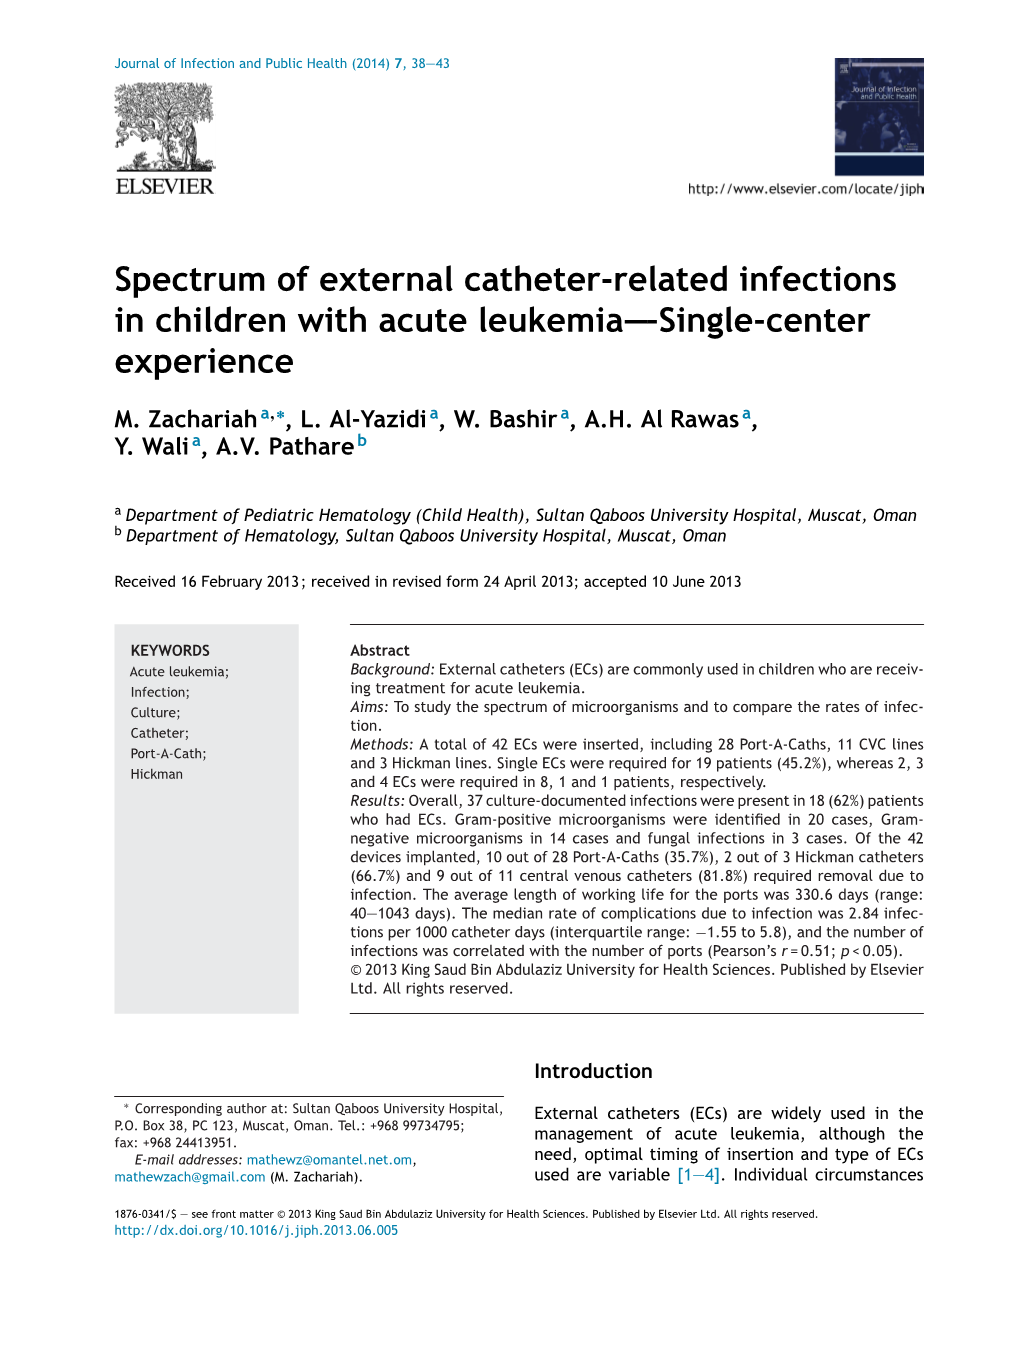 Spectrum of External Catheter-Related Infections in Children with Acute Leukemia—Single-Center Experience